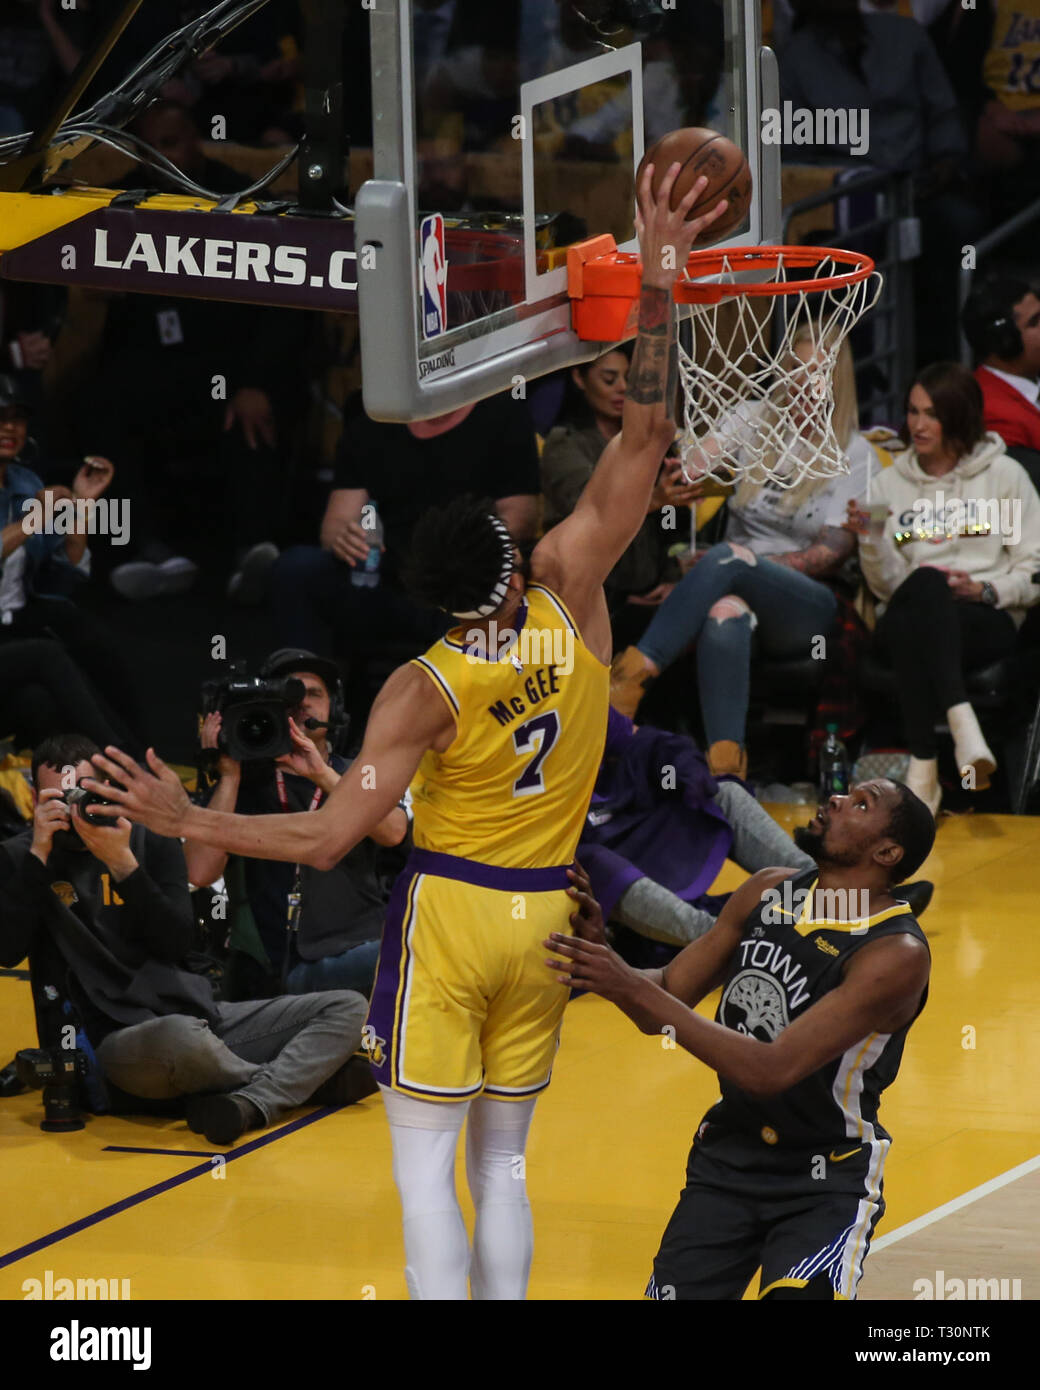 Los Angeles, California, USA. 04th Apr, 2019. Los Angeles Lakers center JaVale McGee #7 dunks during the Golden State Warriors vs Los Angeles Lakers game at Staples Center in Los Angeles, CA. on April 4, 2019. (Photo by Jevone Moore) Credit: Cal Sport Media/Alamy Live News Stock Photo